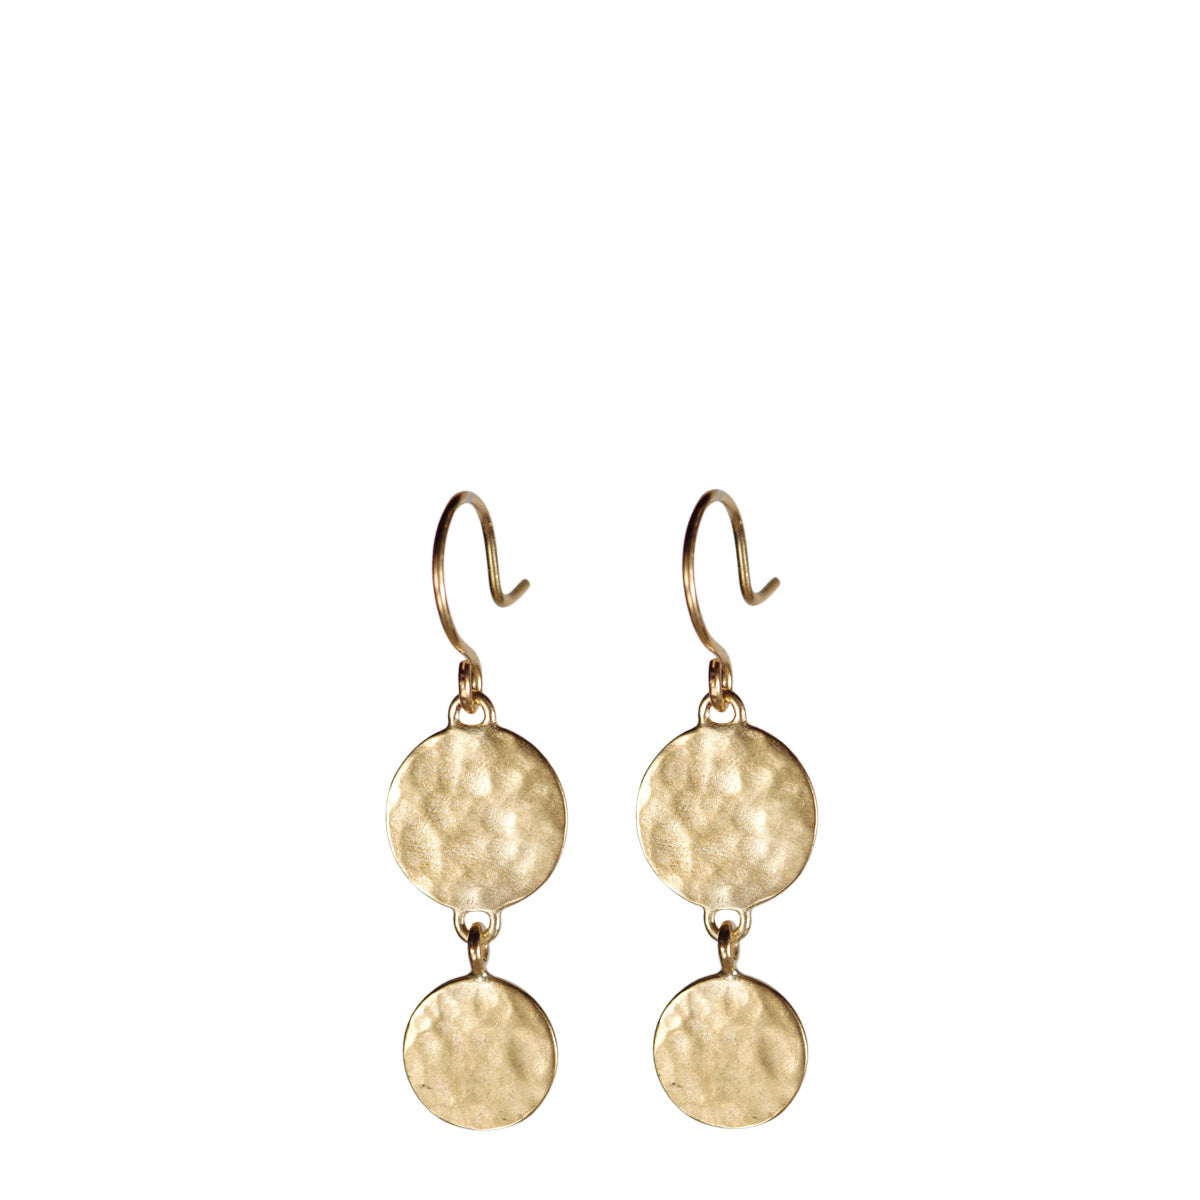 Hammered Gold Disc Earrings – A Box For My Treasure